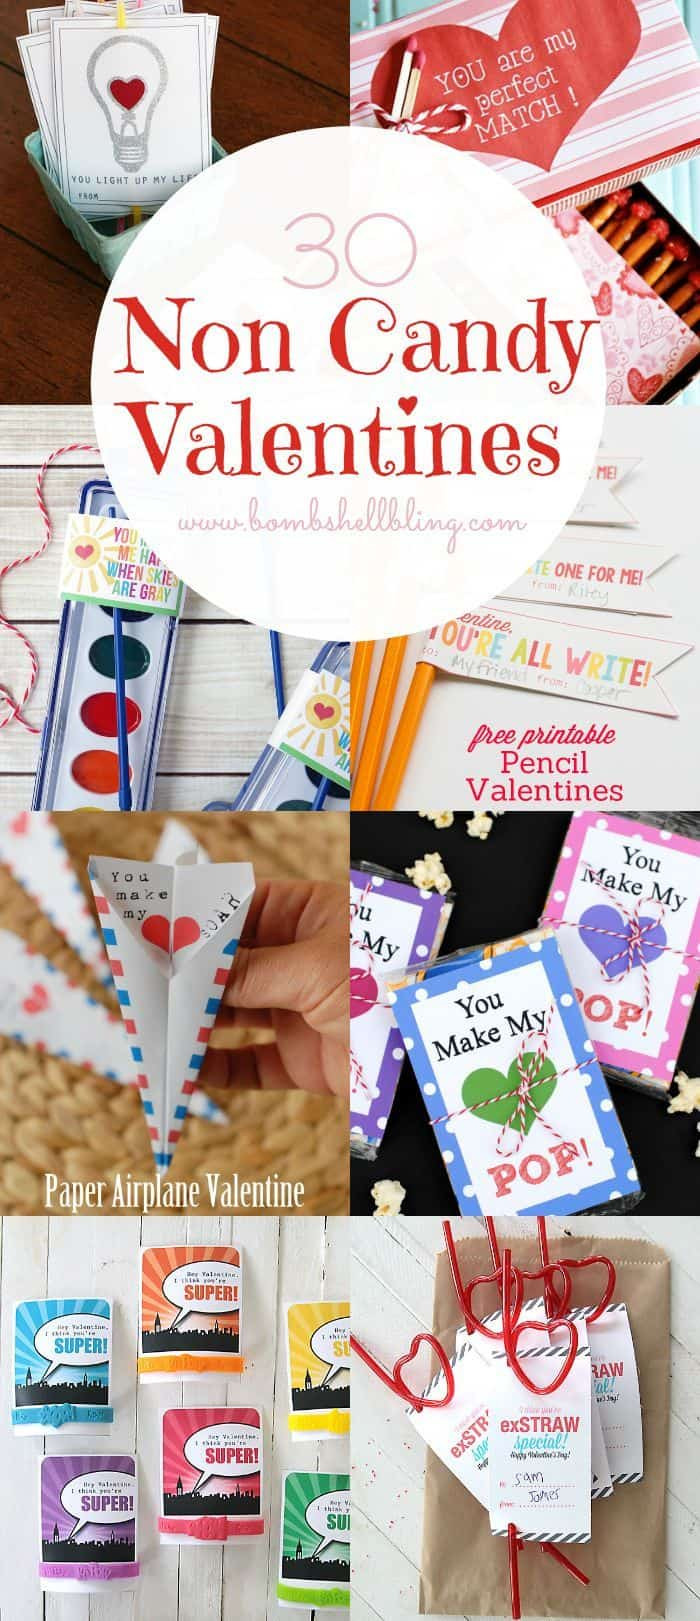 Kids Valentine Gifts
 10 Non Candy Valentine s Day Gift Ideas for Kids